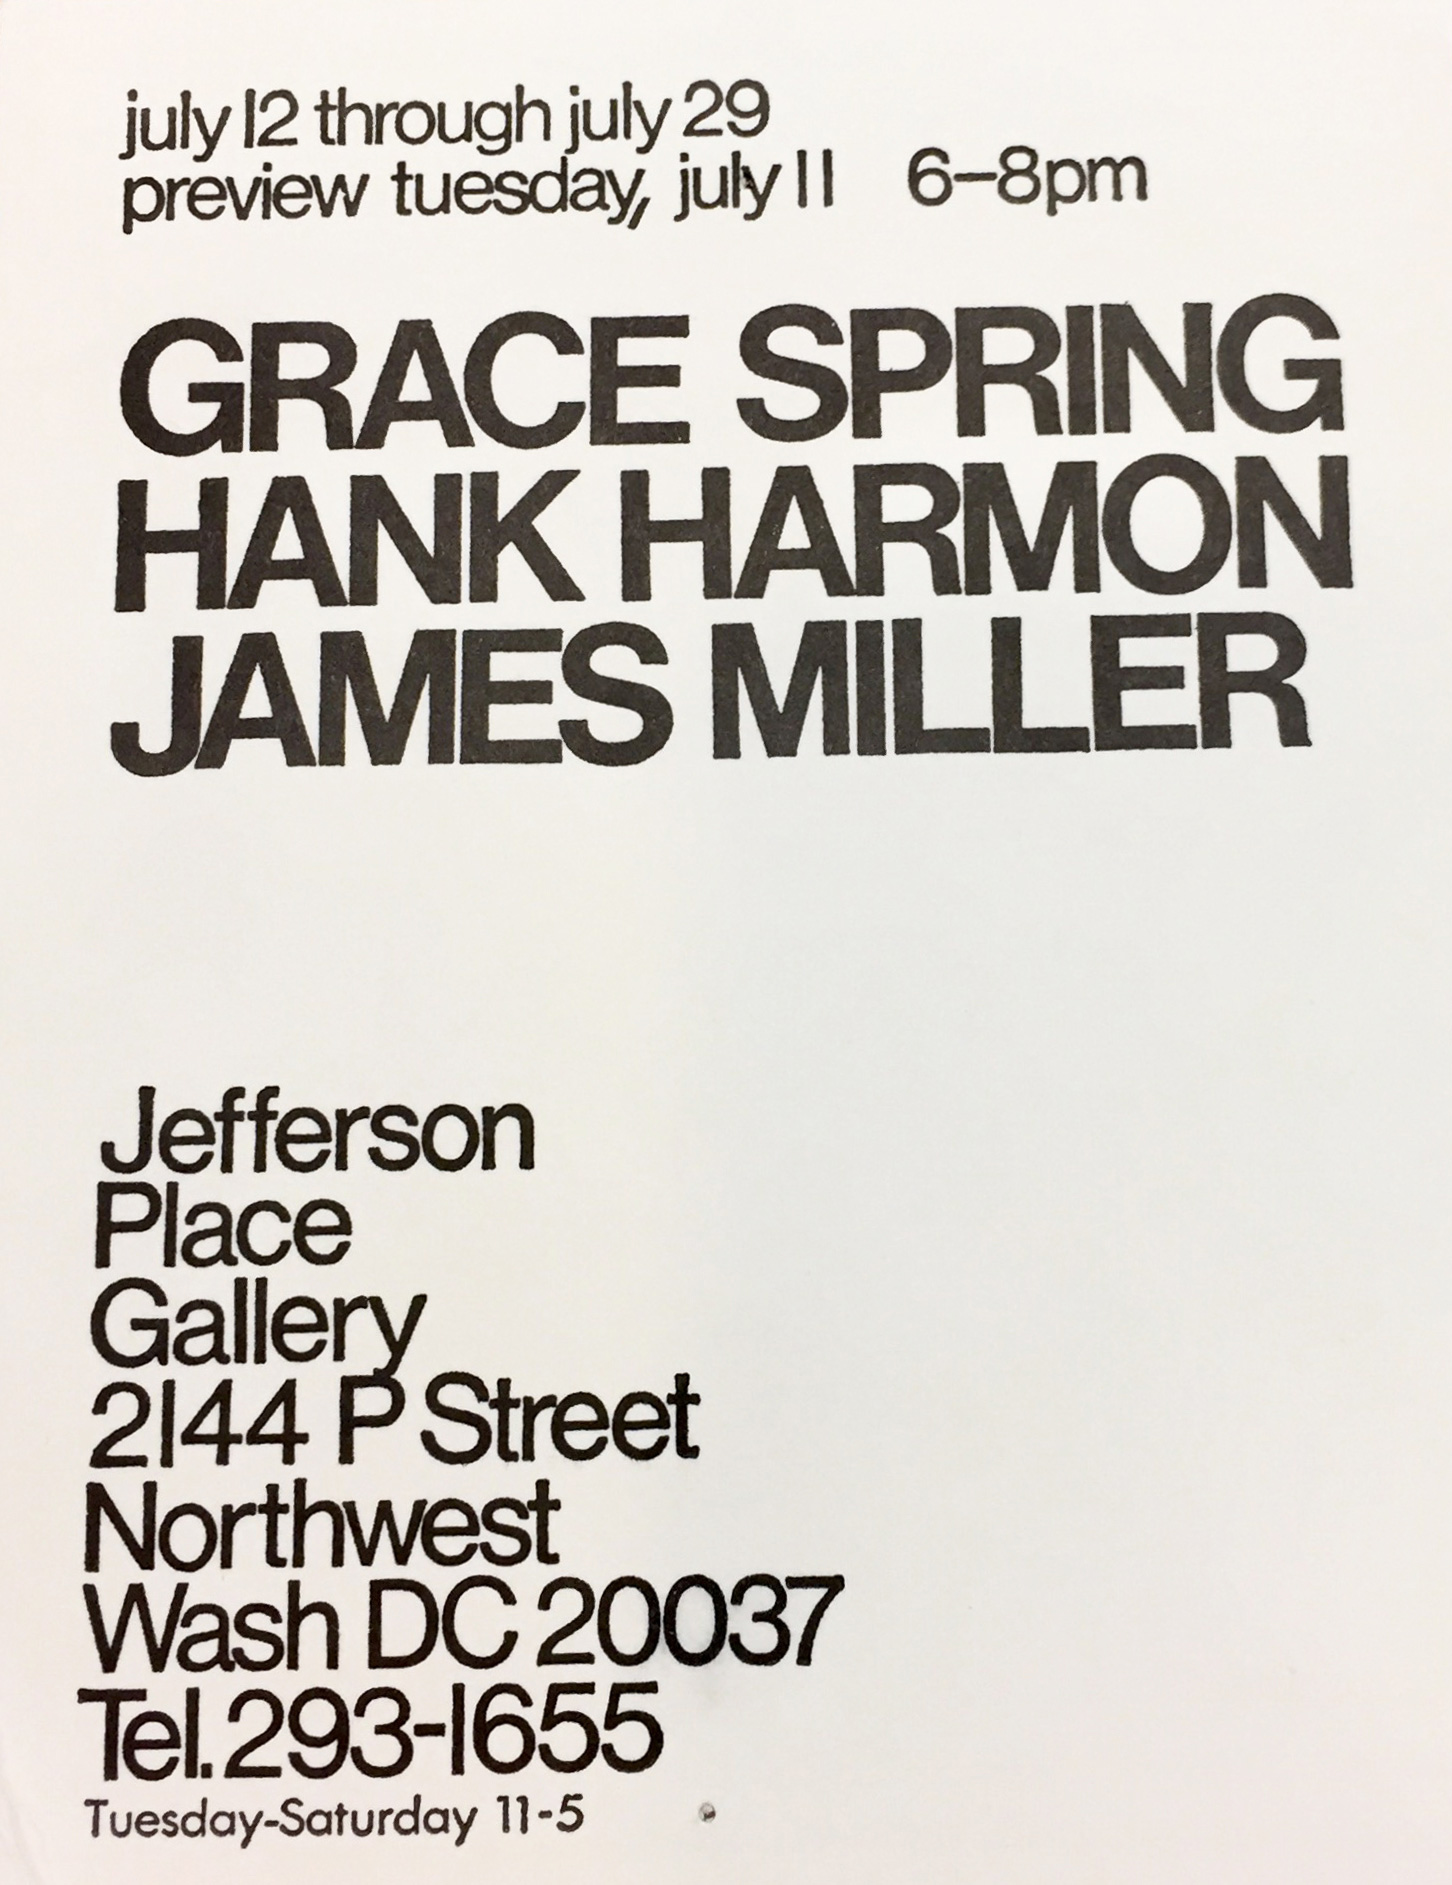 Announcement card for Grace Spring, Hank Harmon, and James Miller at Jefferson Place Gallery